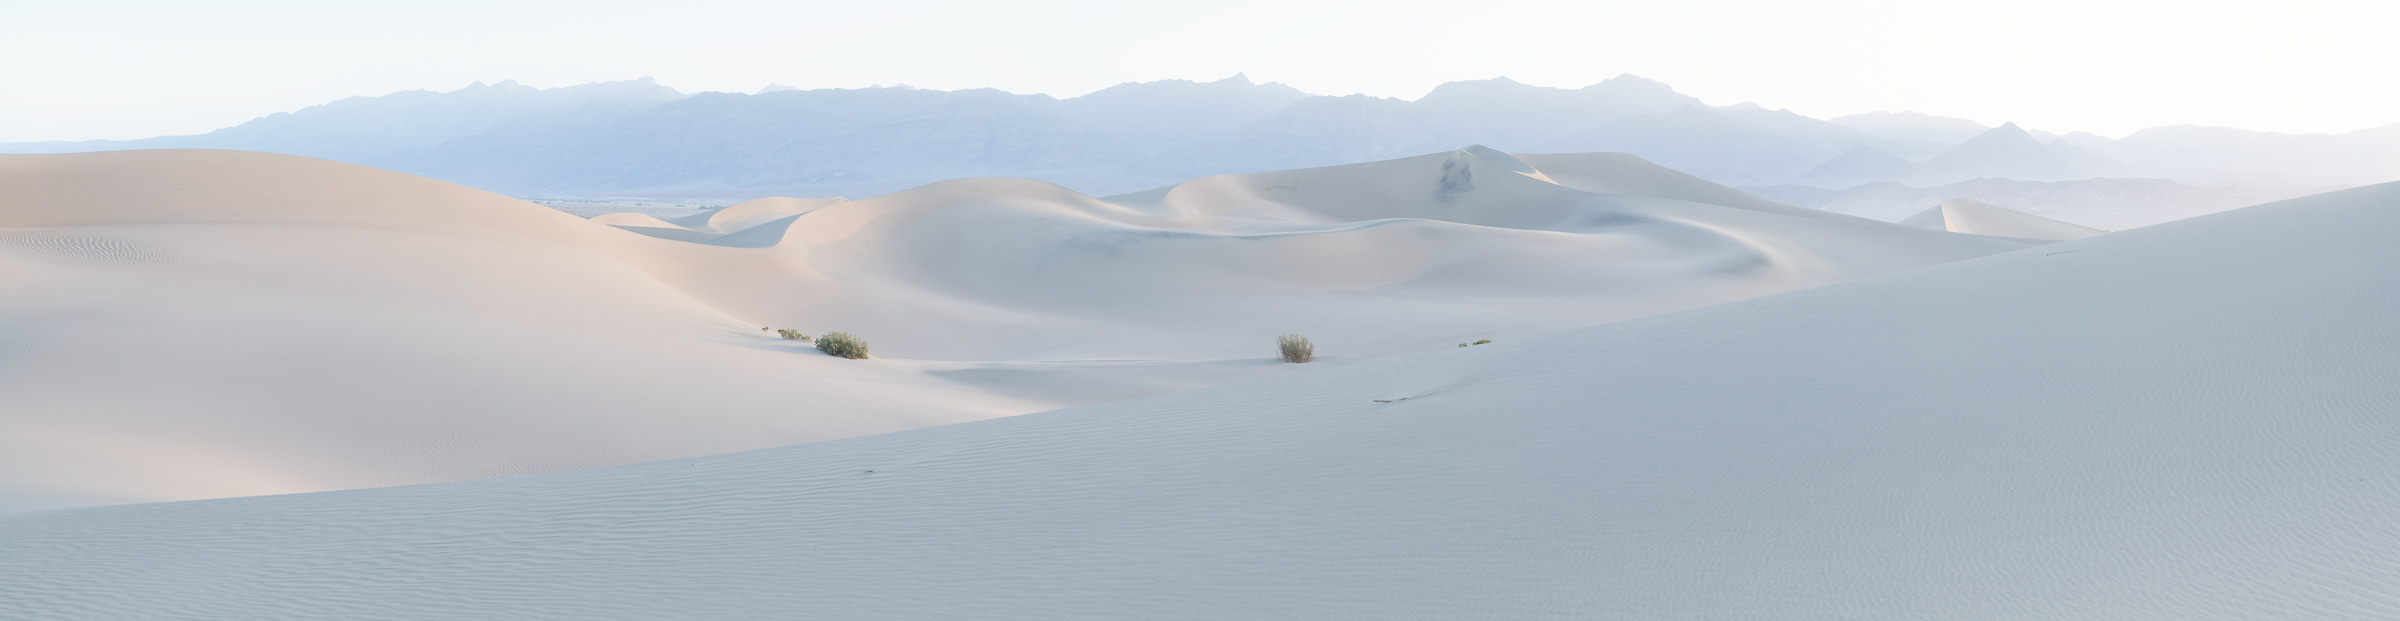 460 megapixels! A very high resolution, large-format VAST photo print of sand dunes; landscape photograph created by Greg Probst in Mesquite Flat Sand Dunes, Death Valley National Park, California.